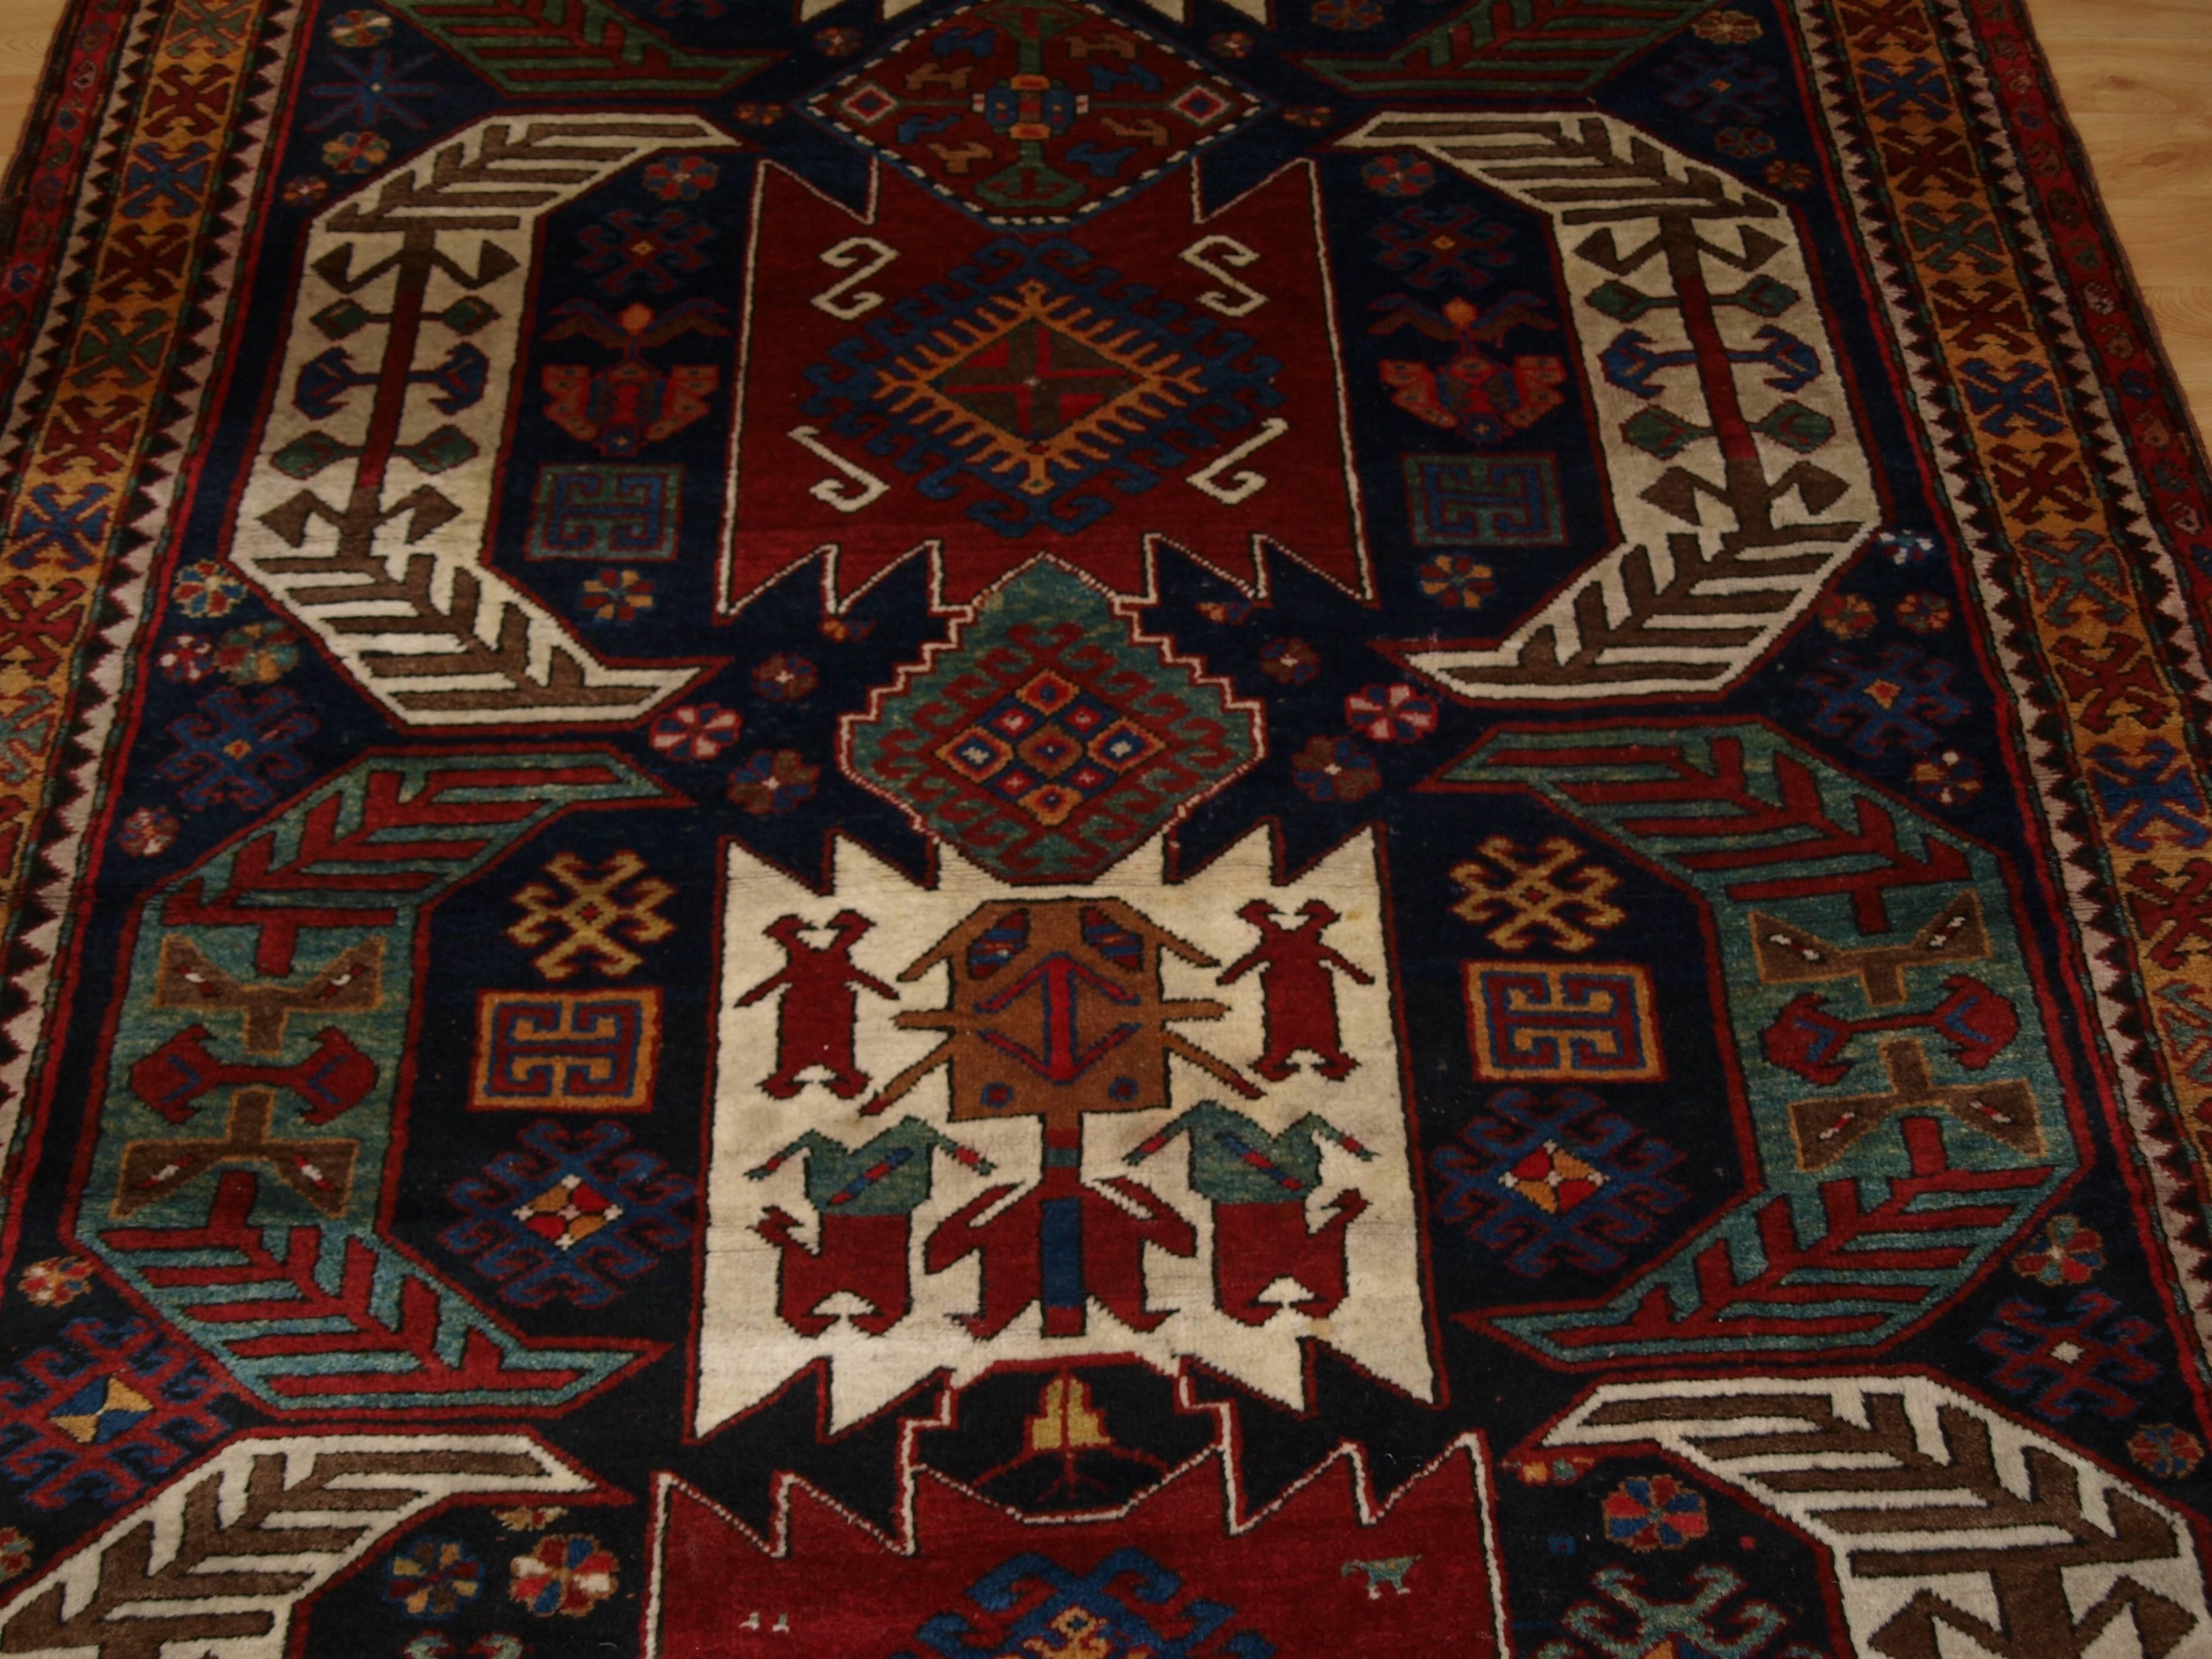 Size: 8ft 10in x 5ft 9in (268 x 174cm).

Antique Caucasian Kasim Ushak or Lenkoran region rug of outstanding bold design with stunning colours.

Circa 1900.

This rug is a good large size example of type, the drawing and colour palette is of